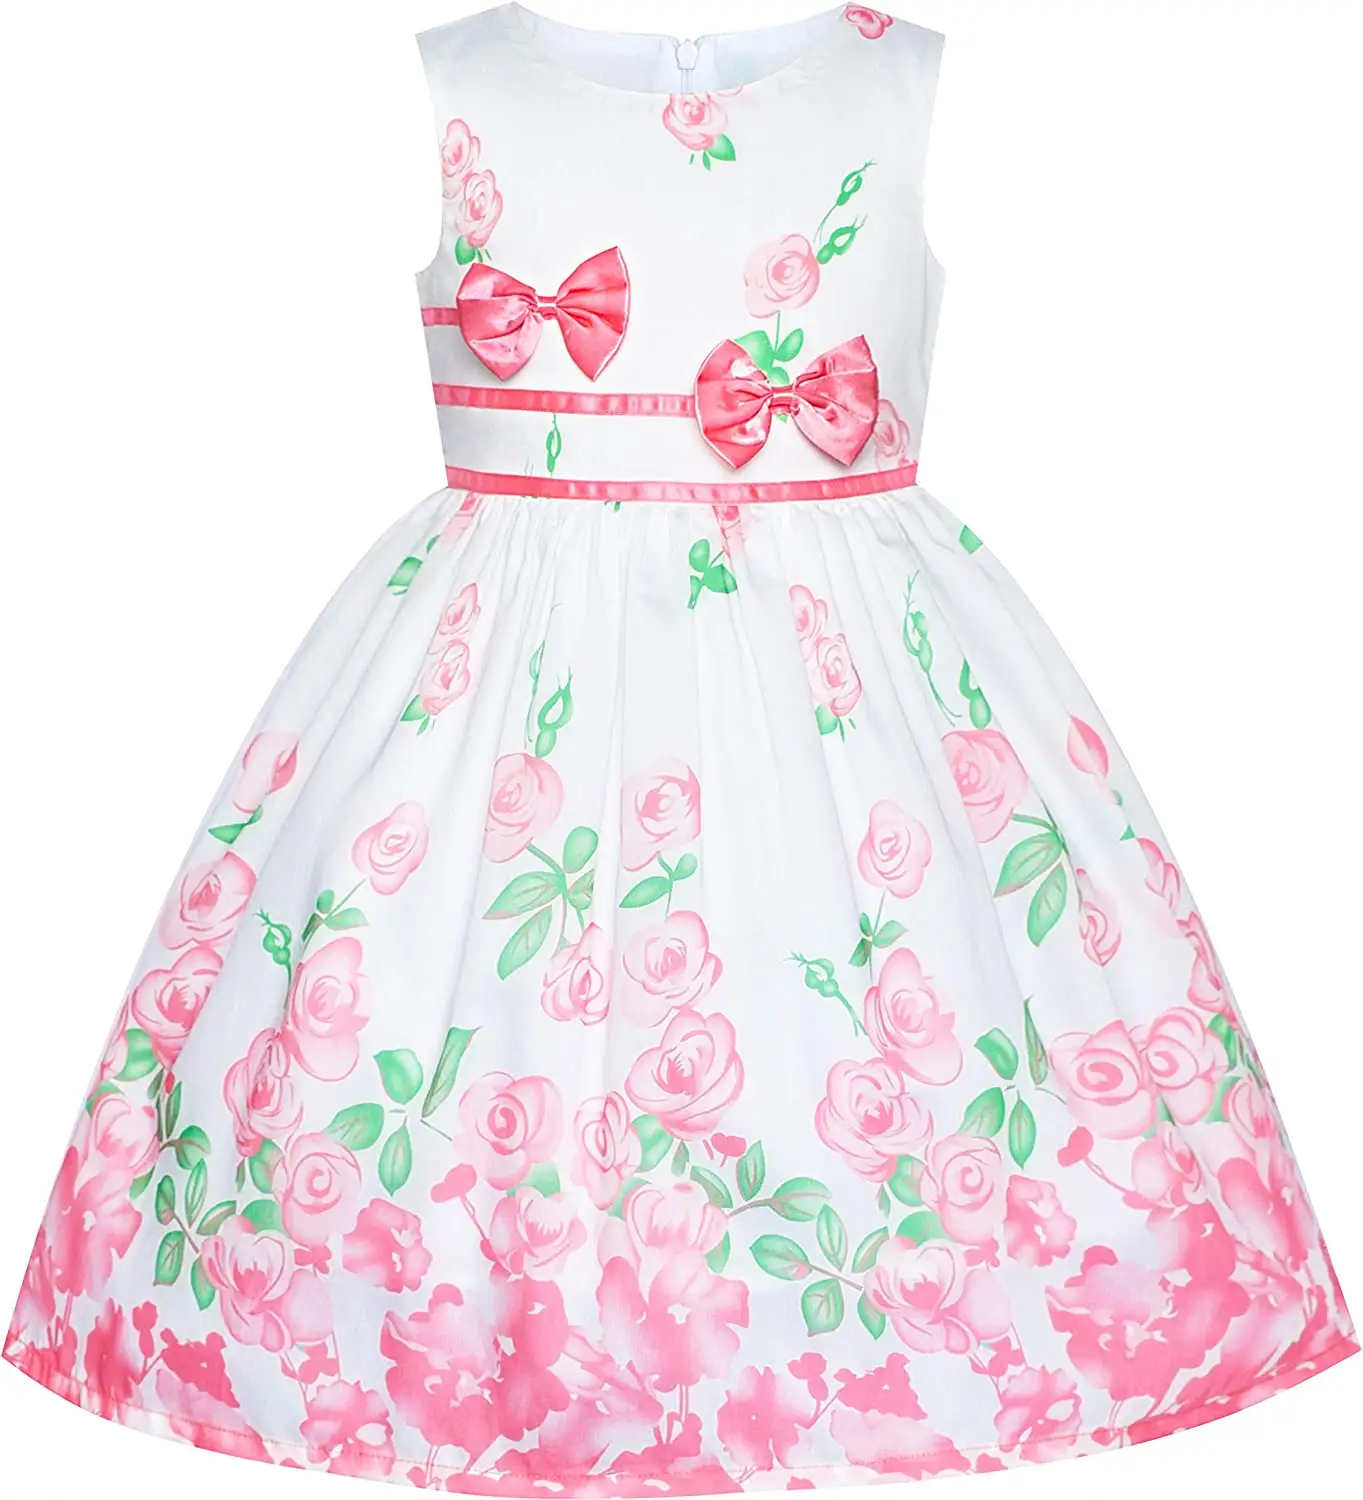 Rose Flower Children's Princess Frock Design Clothes Baby Girl Ruffle Dress Smoked Cute Summer Party Sundresses For Kids